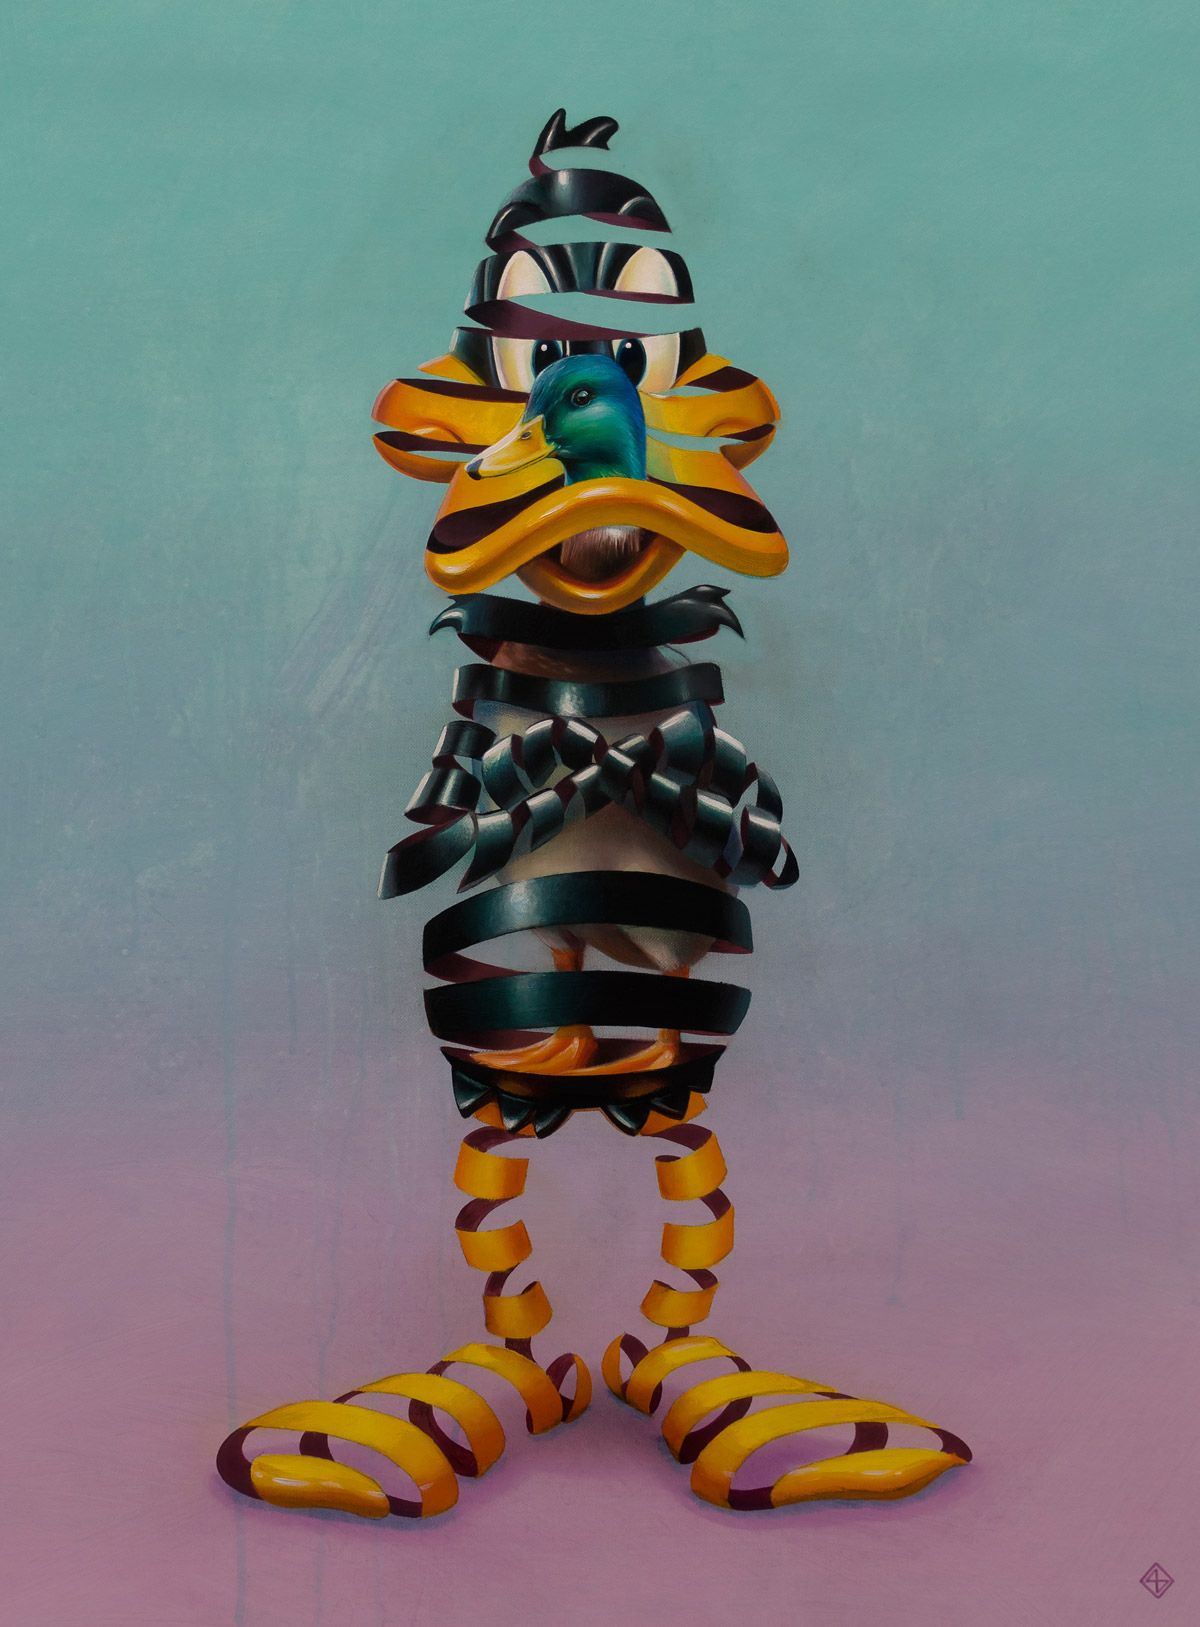 creative surreal paintings ideas duck by stefan thelen